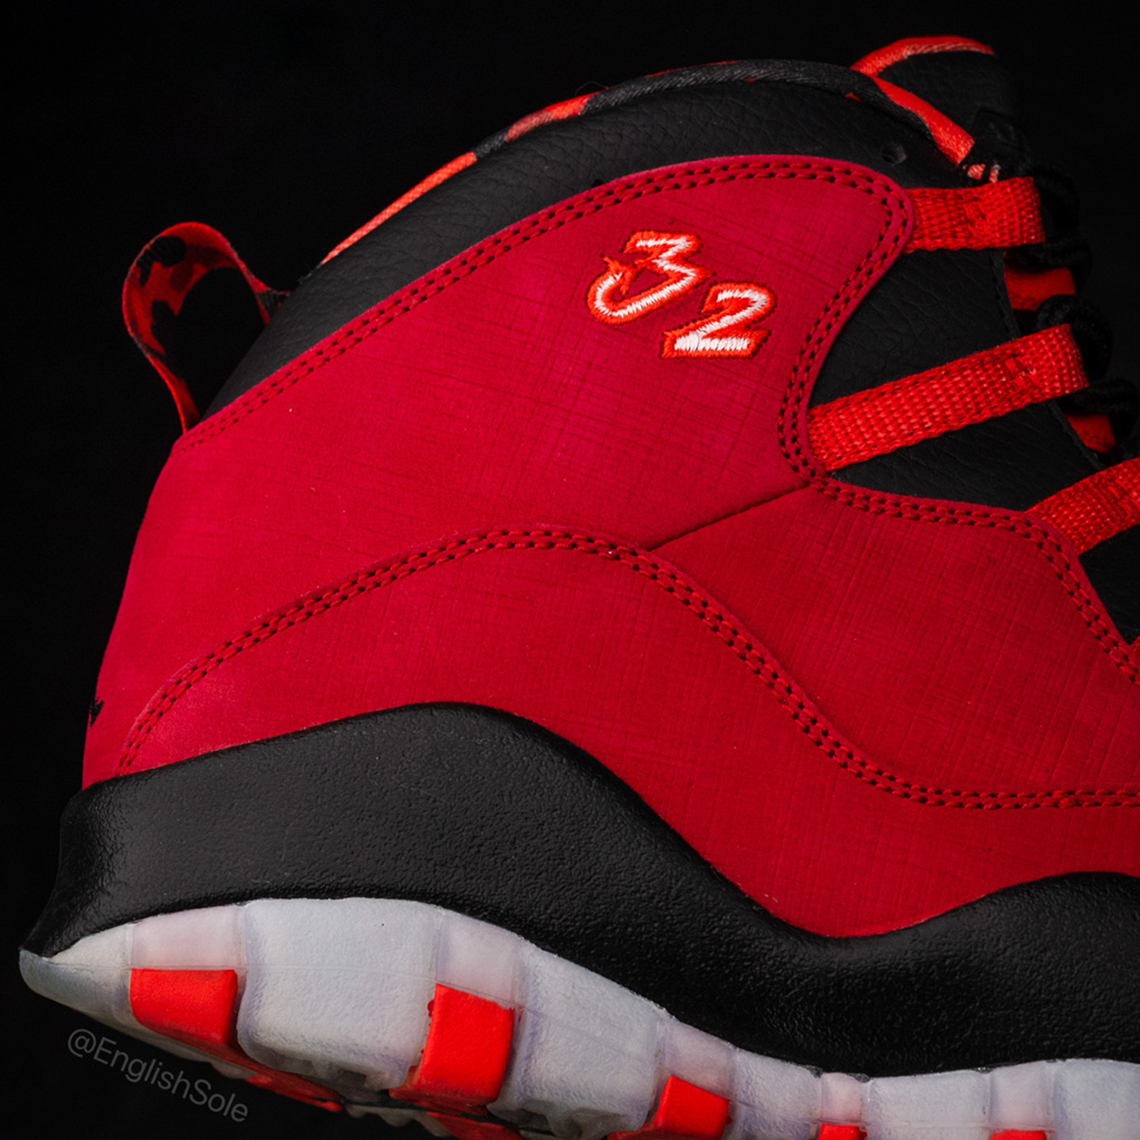 Blake Griffin Check out the Air Jordan VIII 8 3 Peat sample below and head over to Pe 9